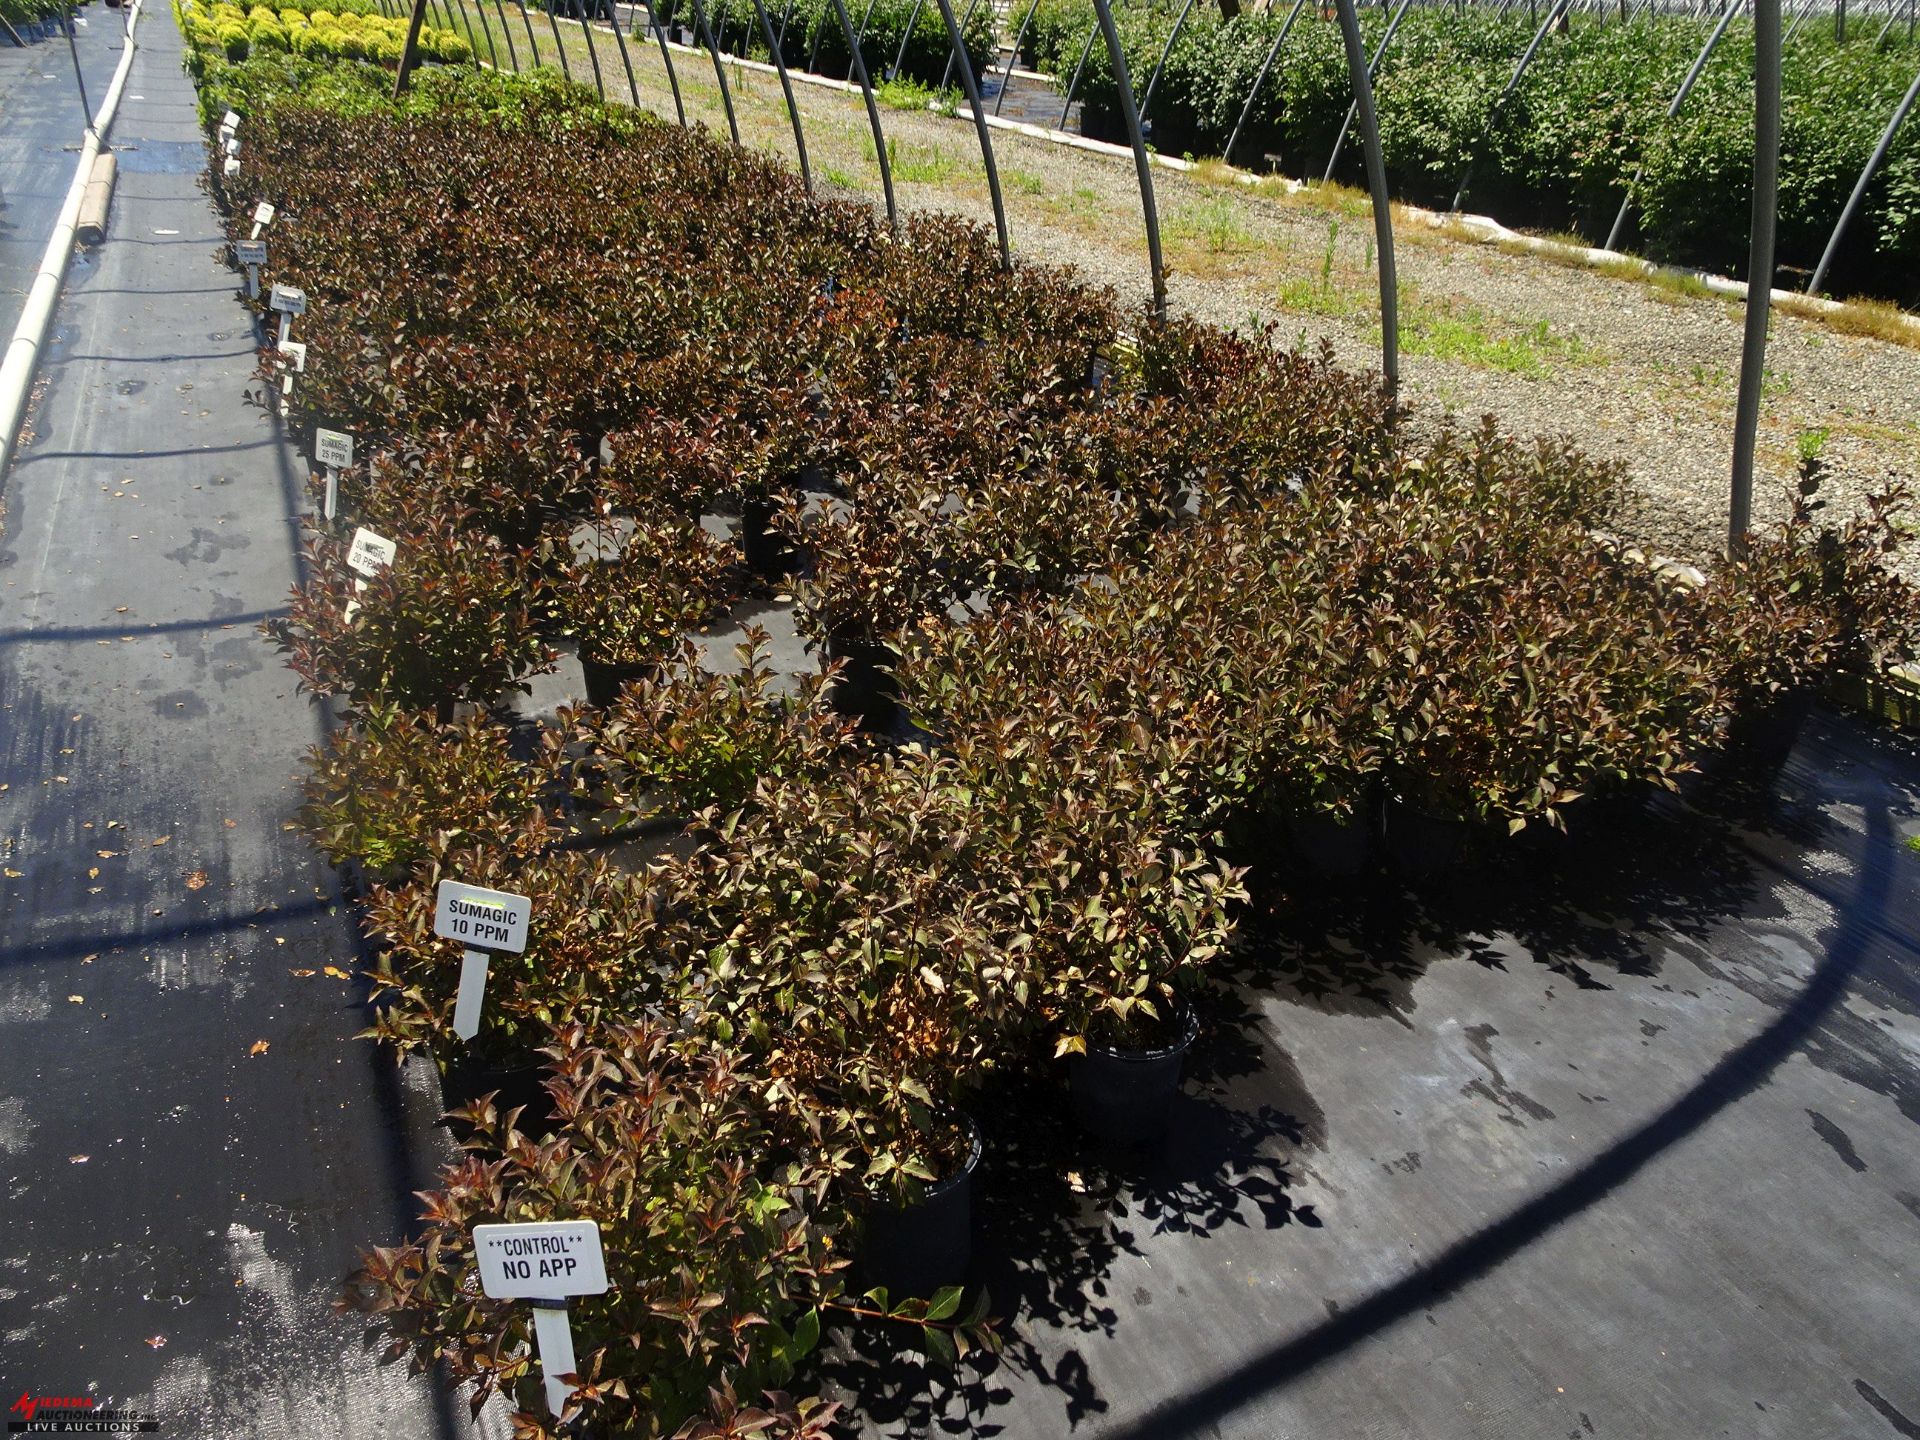 +TOTAL OF APPROX (2589) PLANTS, THEY CONSIST OF: (228) EYONYMUS EMERALD 'N GOLD N03, (47) EUONYMUS - Image 6 of 11